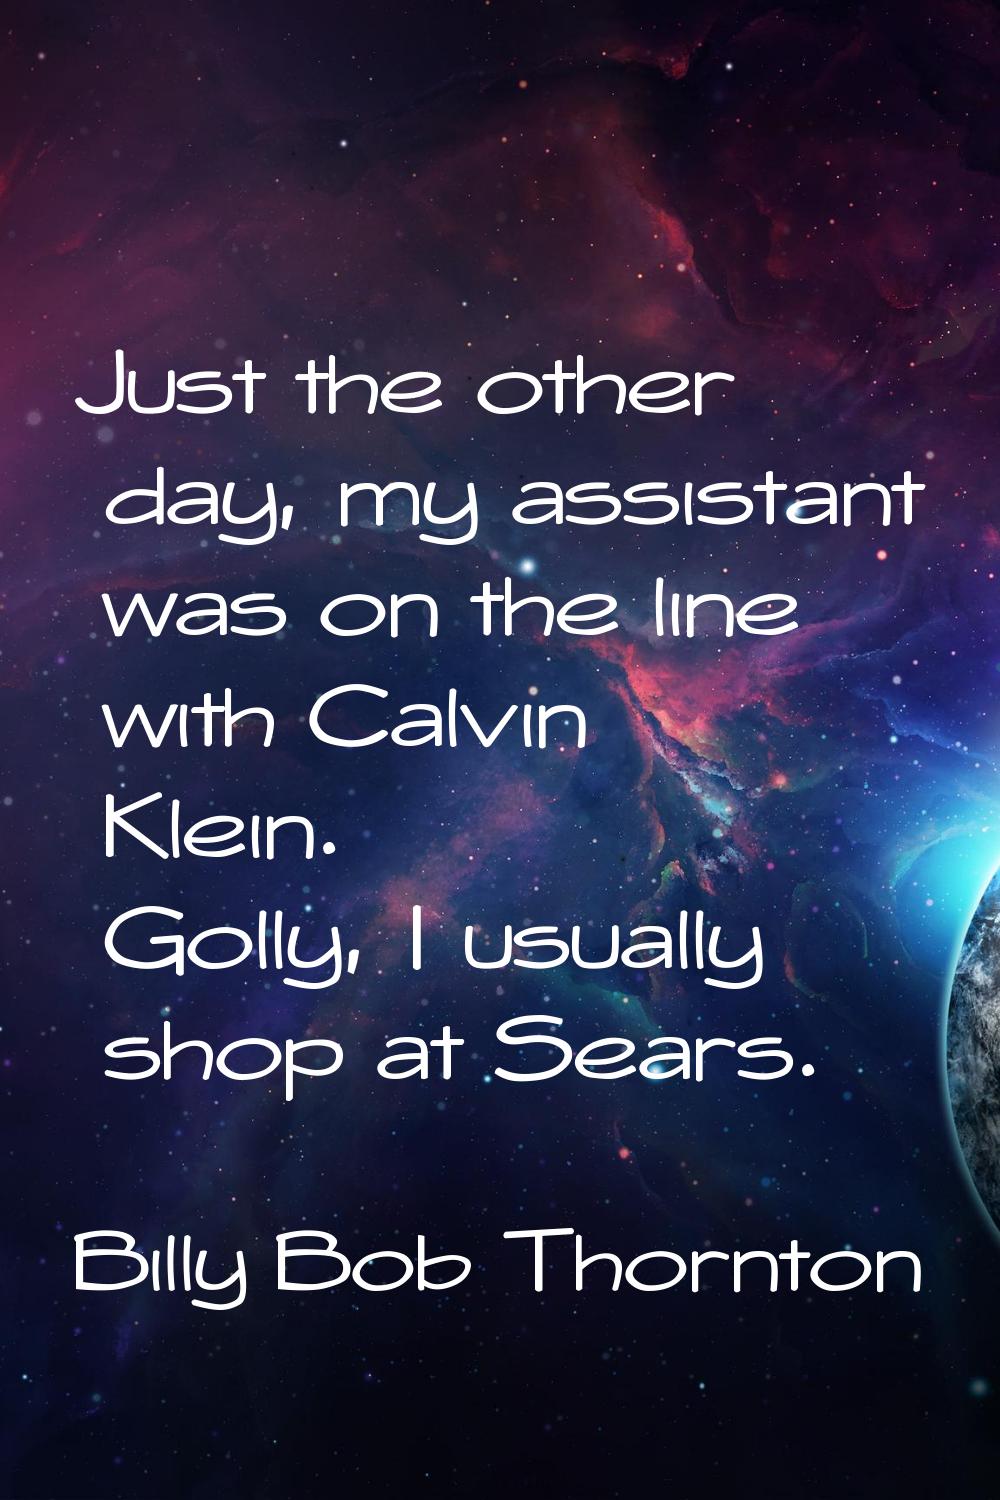 Just the other day, my assistant was on the line with Calvin Klein. Golly, I usually shop at Sears.